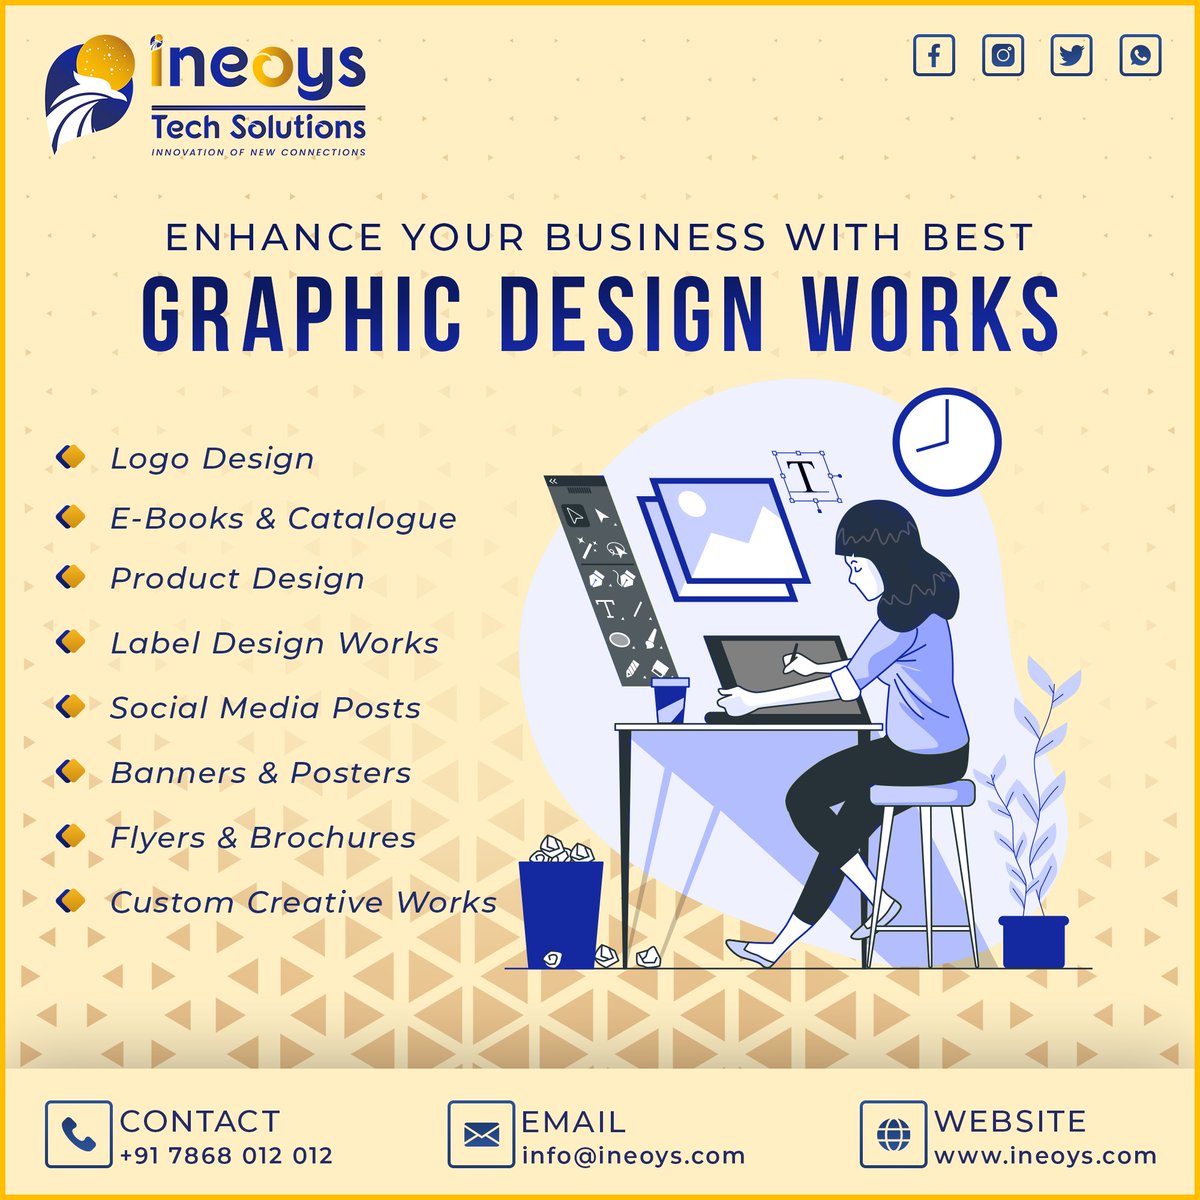 Get attractive, creative Graphic Design works for your Business from us!!!

#adagency #advertising_insta #socialmediaadvertising #mediaagency #advertising_agency #creativeadvertisingideas #ineoys #ineoysmadurai #ineoystechsolutionsmadurai